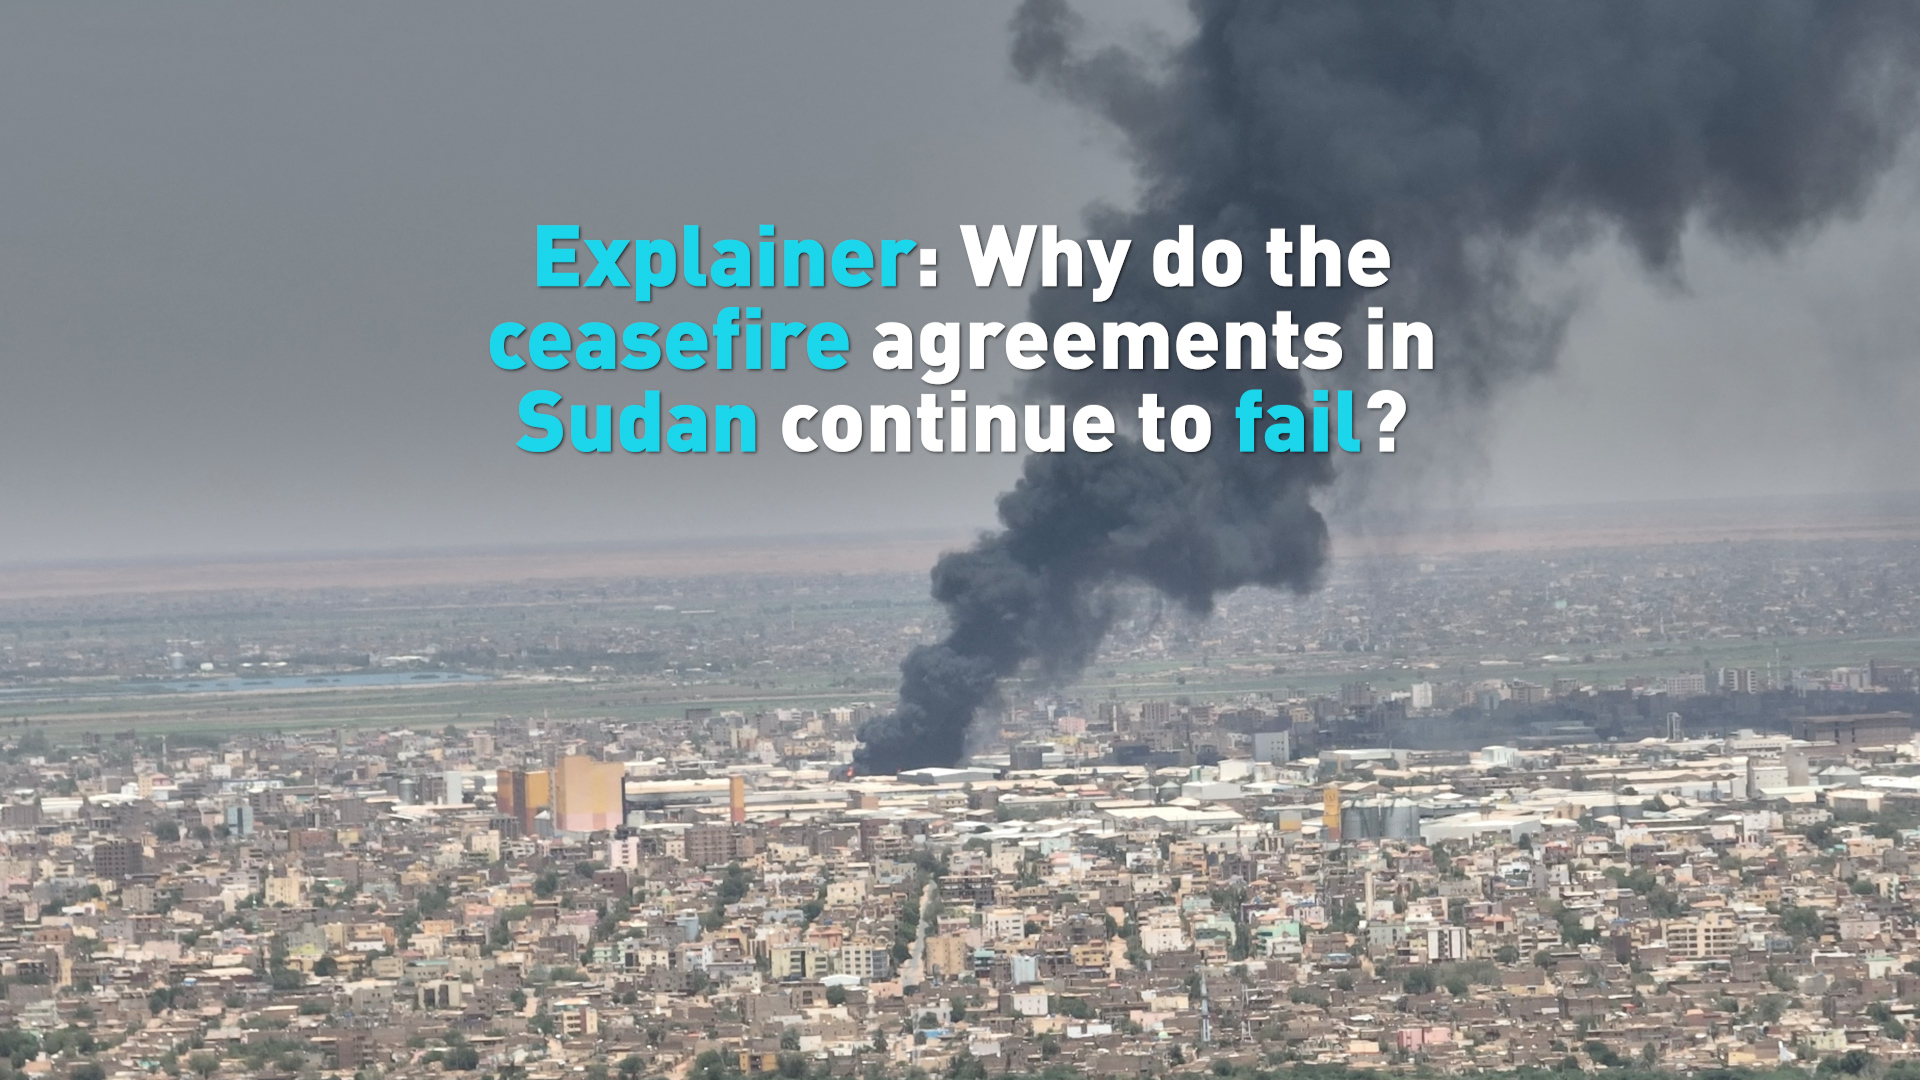 Explainer: Why do the ceasefire agreements in Sudan continue to fail?